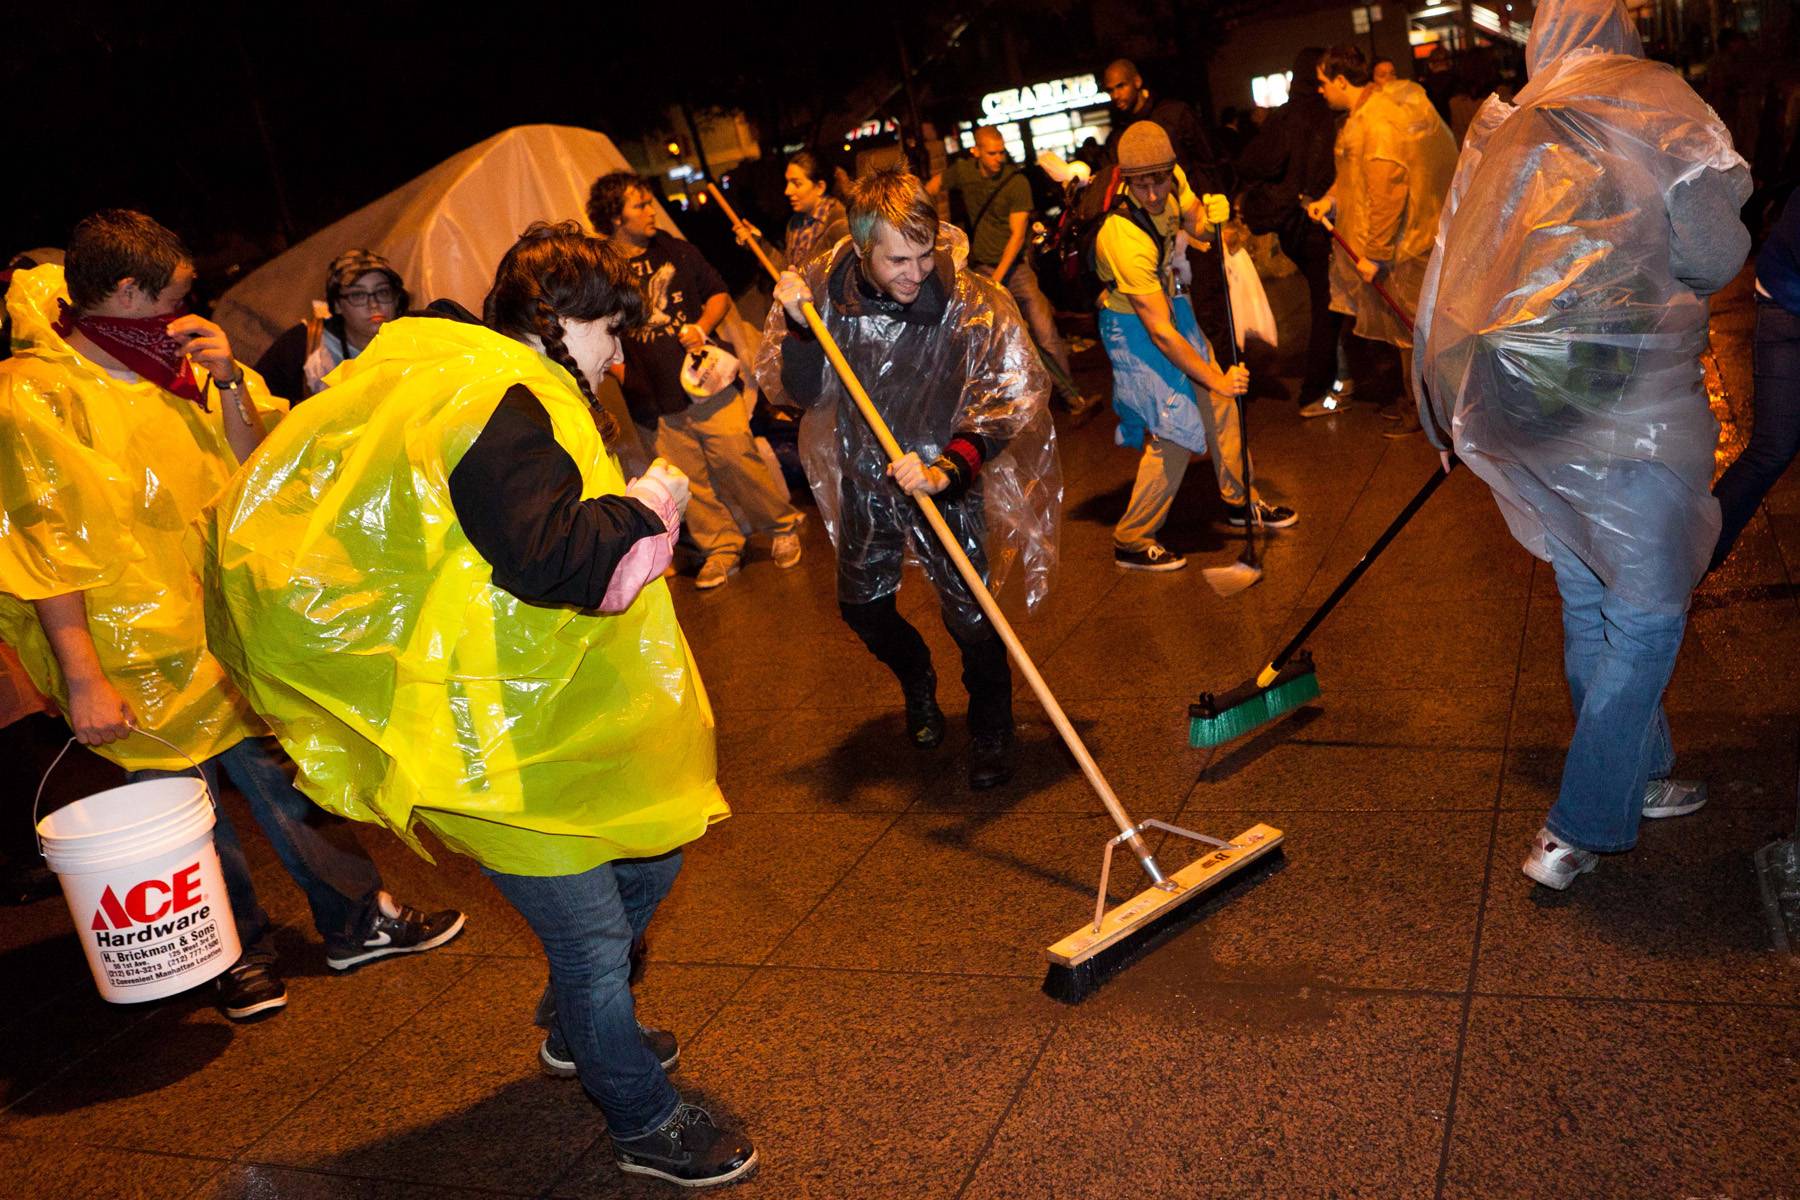 Occupy Wall Street Protesters Skirt Shutdown With Clean Up  - Facing a temporary shutdown for routine cleaning of Manhattan’s Zuccotti Park Thursday, Oct. 13, Occupy Wall Street protesters were told by the city that they could remain in the park after about 600-700 protesters banded together and cleaned up the mess themselves.(Photo: AP Photo/John Minchillo)